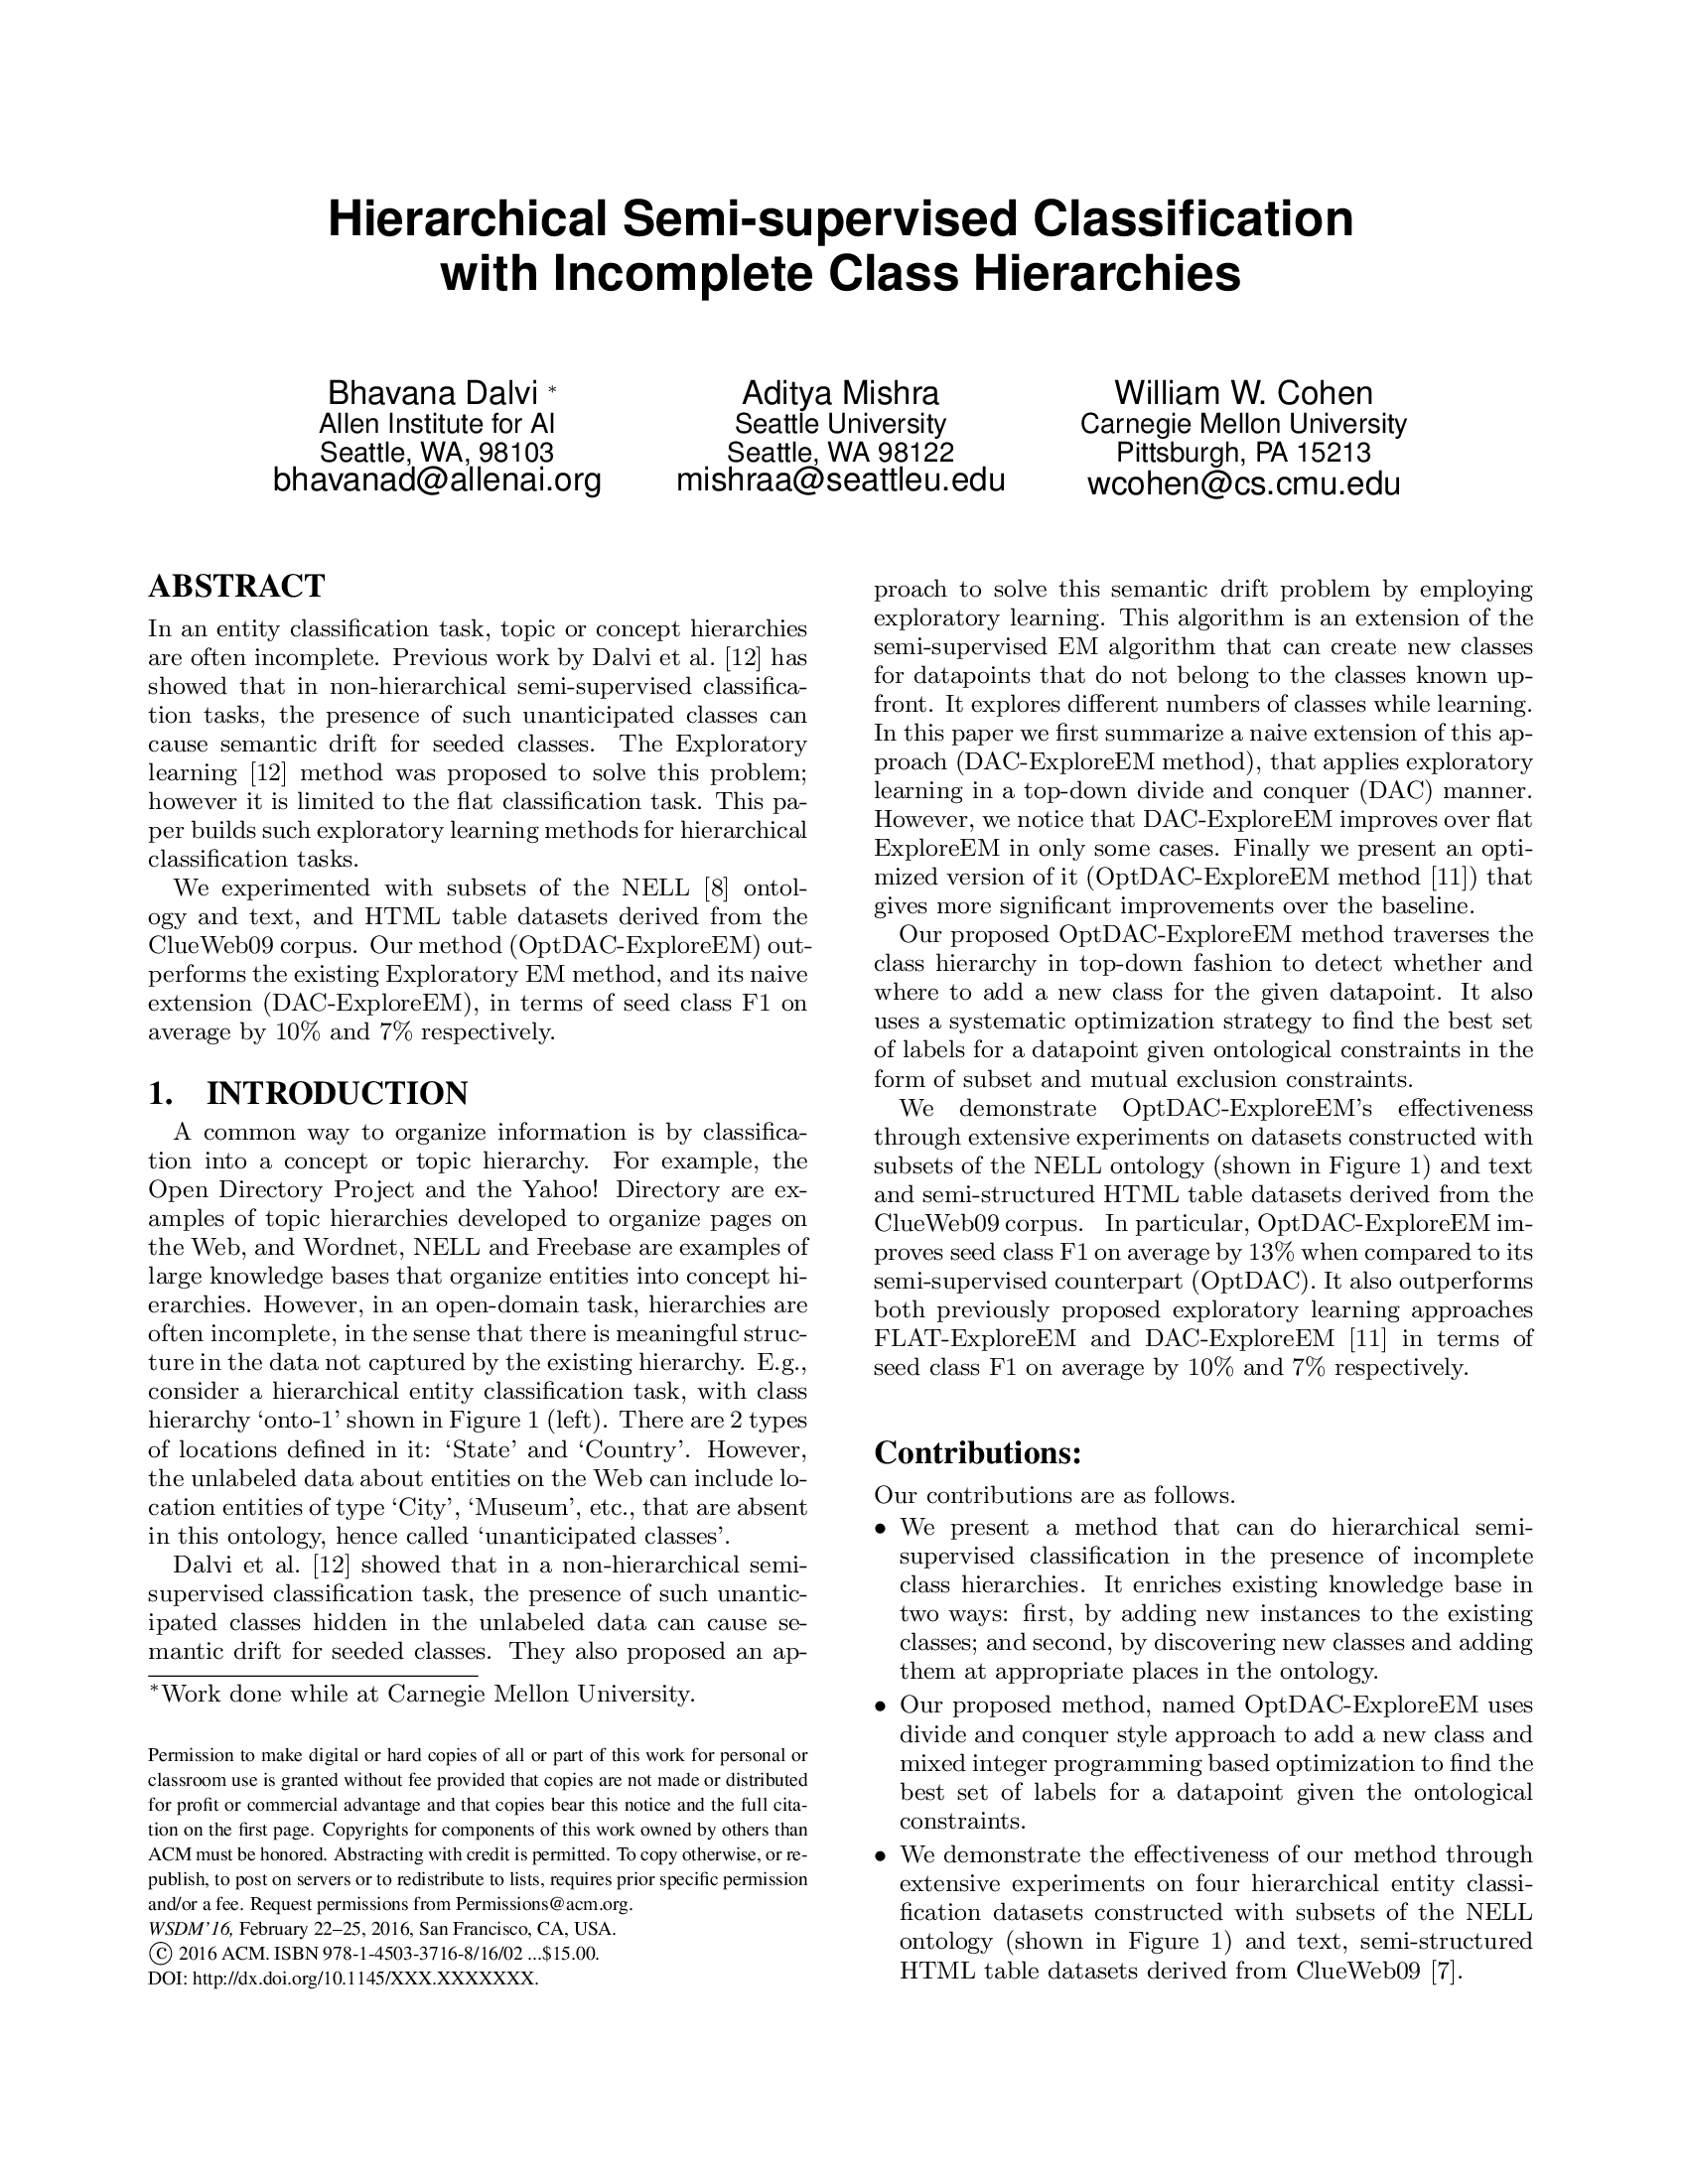 Hierarchical Semi-supervised Classification with Incomplete Class Hierarchies